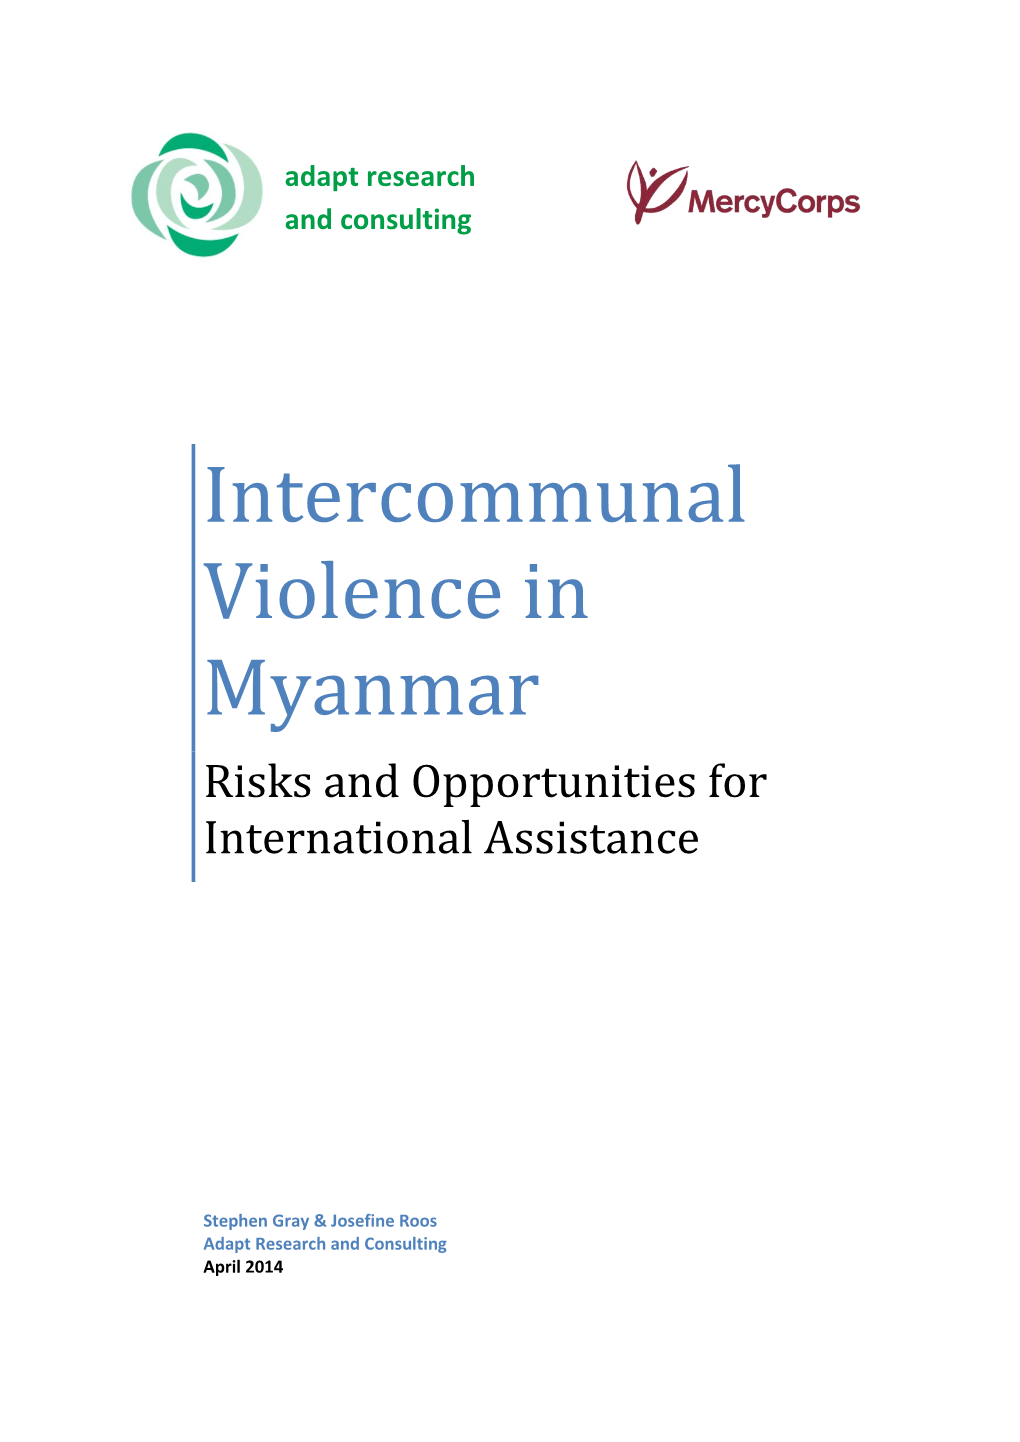 Intercommunal Violence in Myanmar Risks and Opportunities for International Assistance